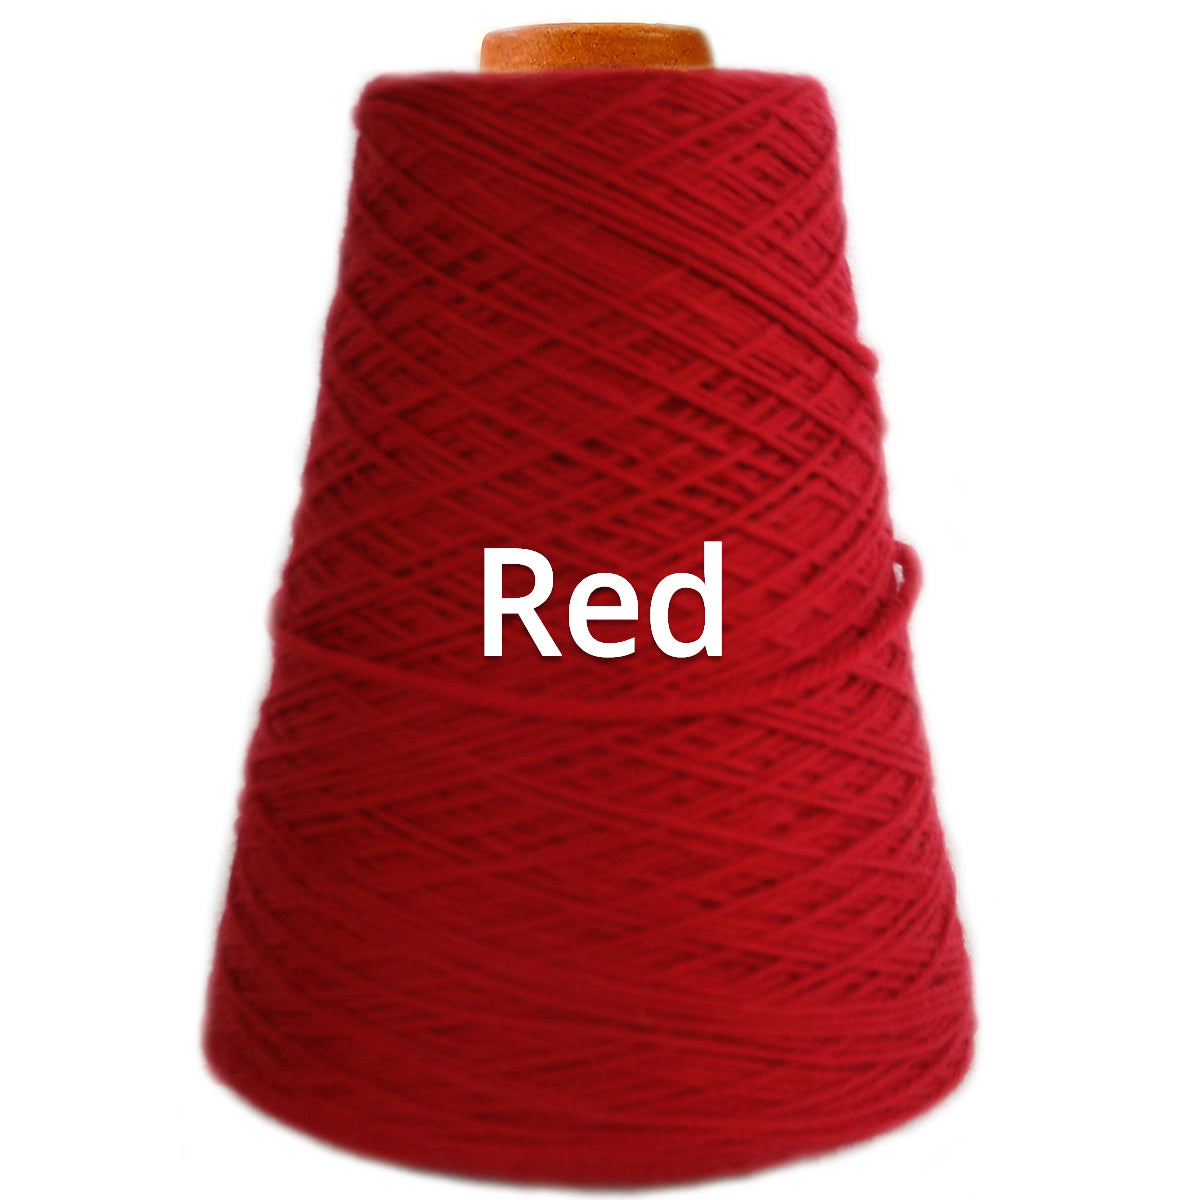 Red - Nundle Collection 12 ply Chaffey Yarn 400g Cone